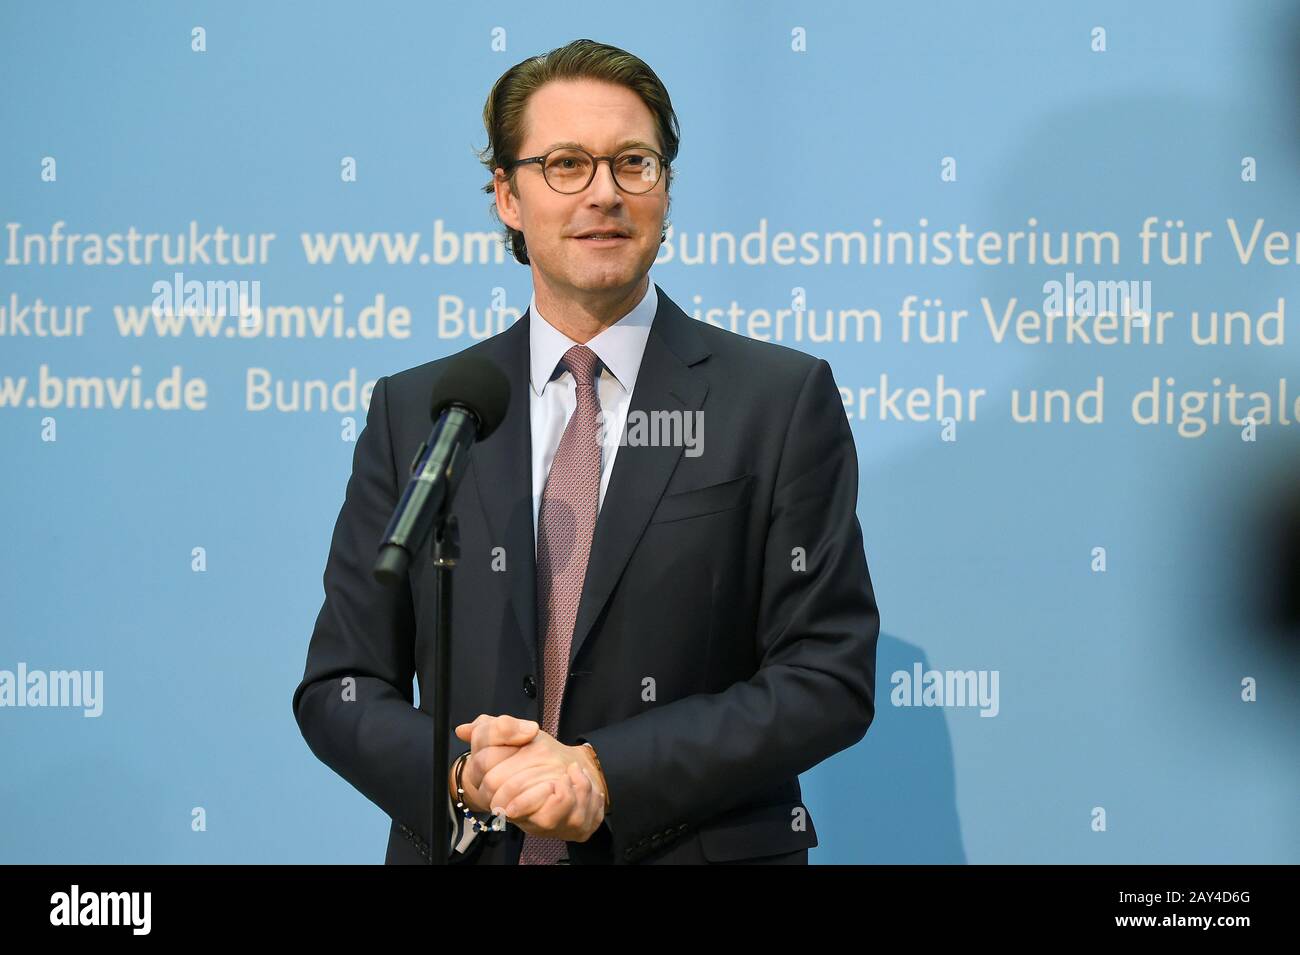 Berlin, Germany. 14th Feb, 2020. Federal Transport Minister Andreas Scheuer (CSU) speaks at a press conference on the topics of speed limits and drones in Berlin. Credit: Sonja Wurtscheid/dpa/Alamy Live News Stock Photo